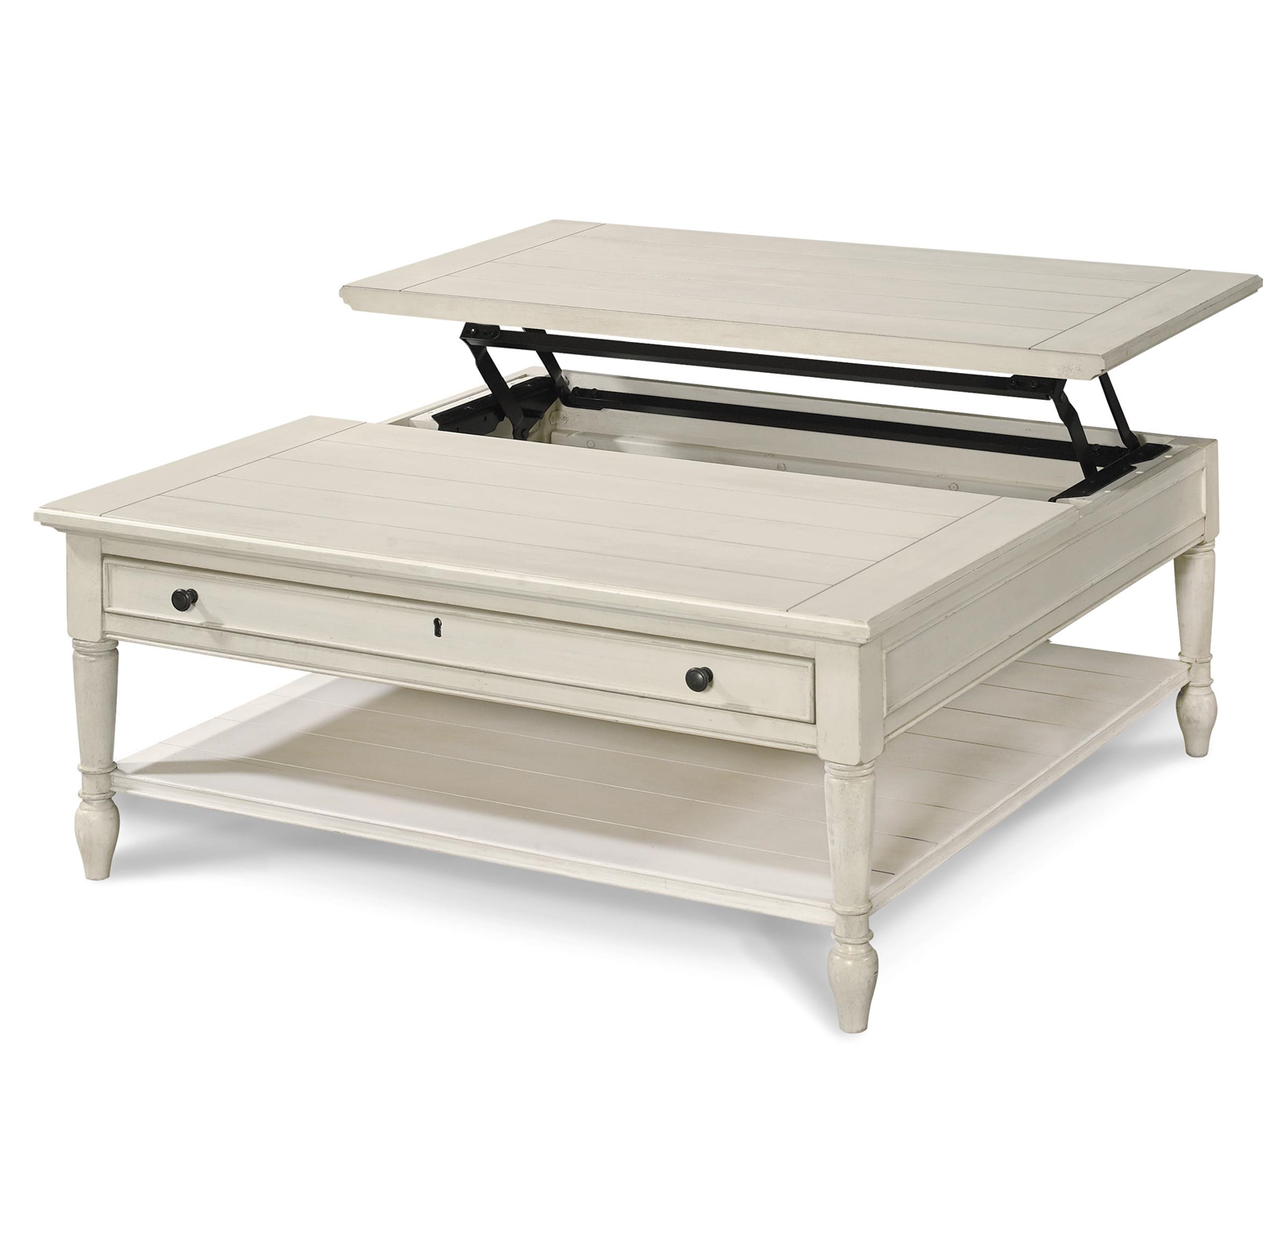 Country Chic White Wood Square Coffee Table With Lift Top | Zin Home Pertaining To Wood Lift Top Coffee Tables (View 12 of 20)